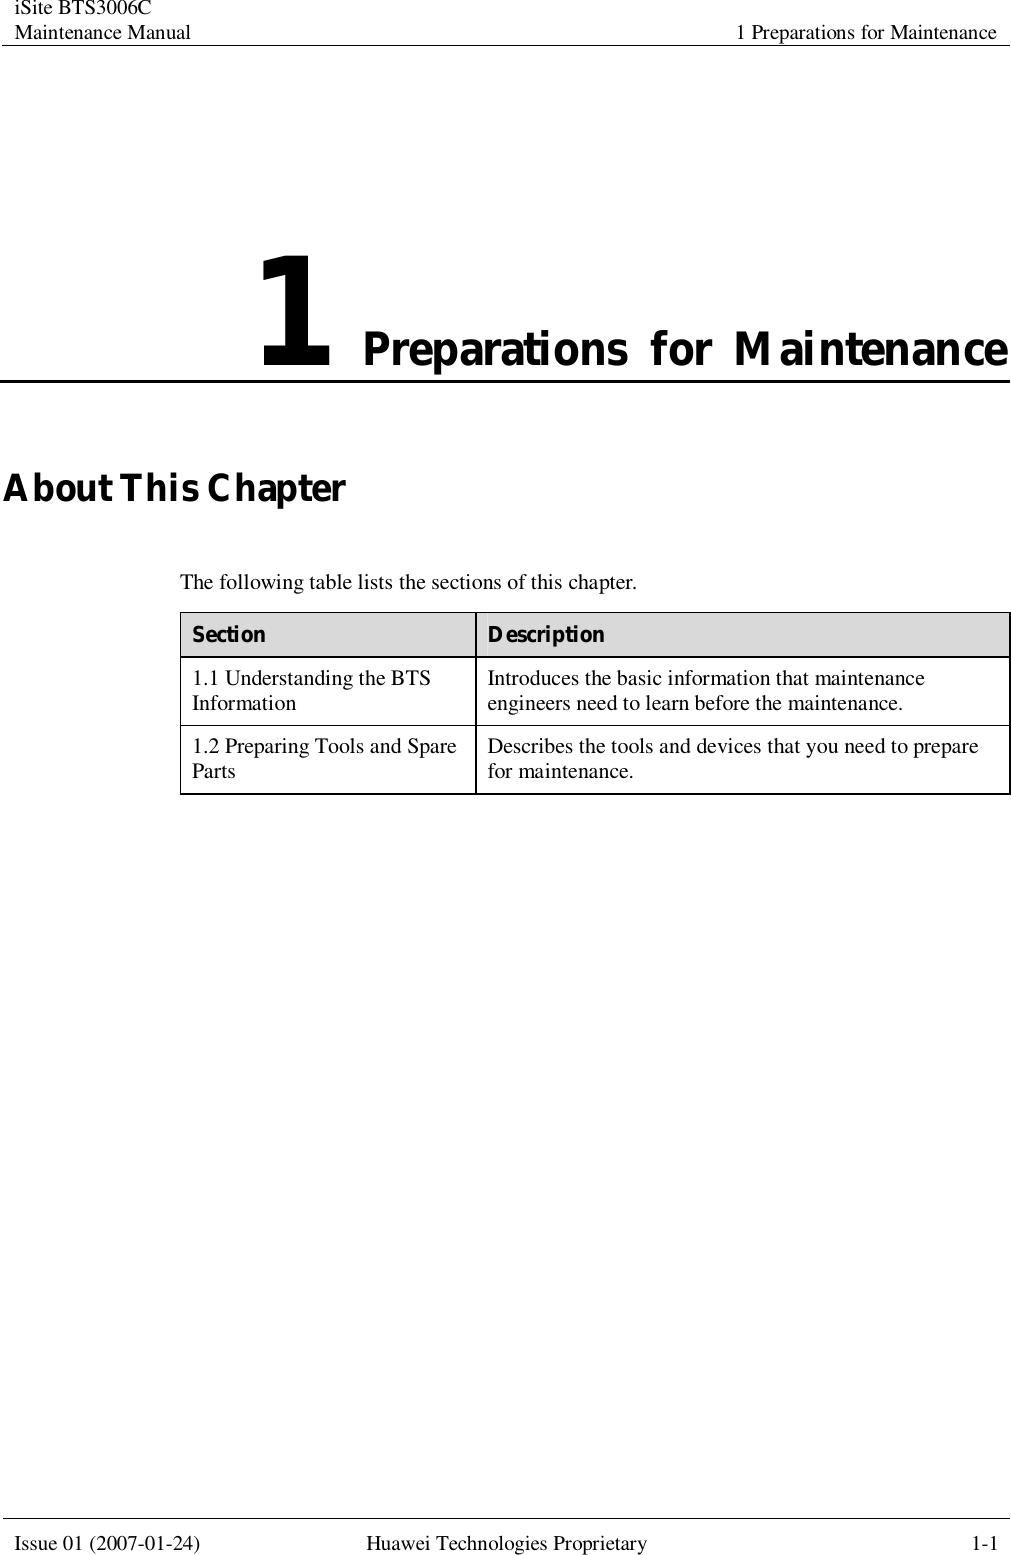 iSite BTS3006C Maintenance Manual 1 Preparations for Maintenance  Issue 01 (2007-01-24) Huawei Technologies Proprietary 1-1  1 Preparations for Maintenance About This Chapter The following table lists the sections of this chapter. Section  Description 1.1 Understanding the BTS Information  Introduces the basic information that maintenance engineers need to learn before the maintenance. 1.2 Preparing Tools and Spare Parts  Describes the tools and devices that you need to prepare for maintenance.  